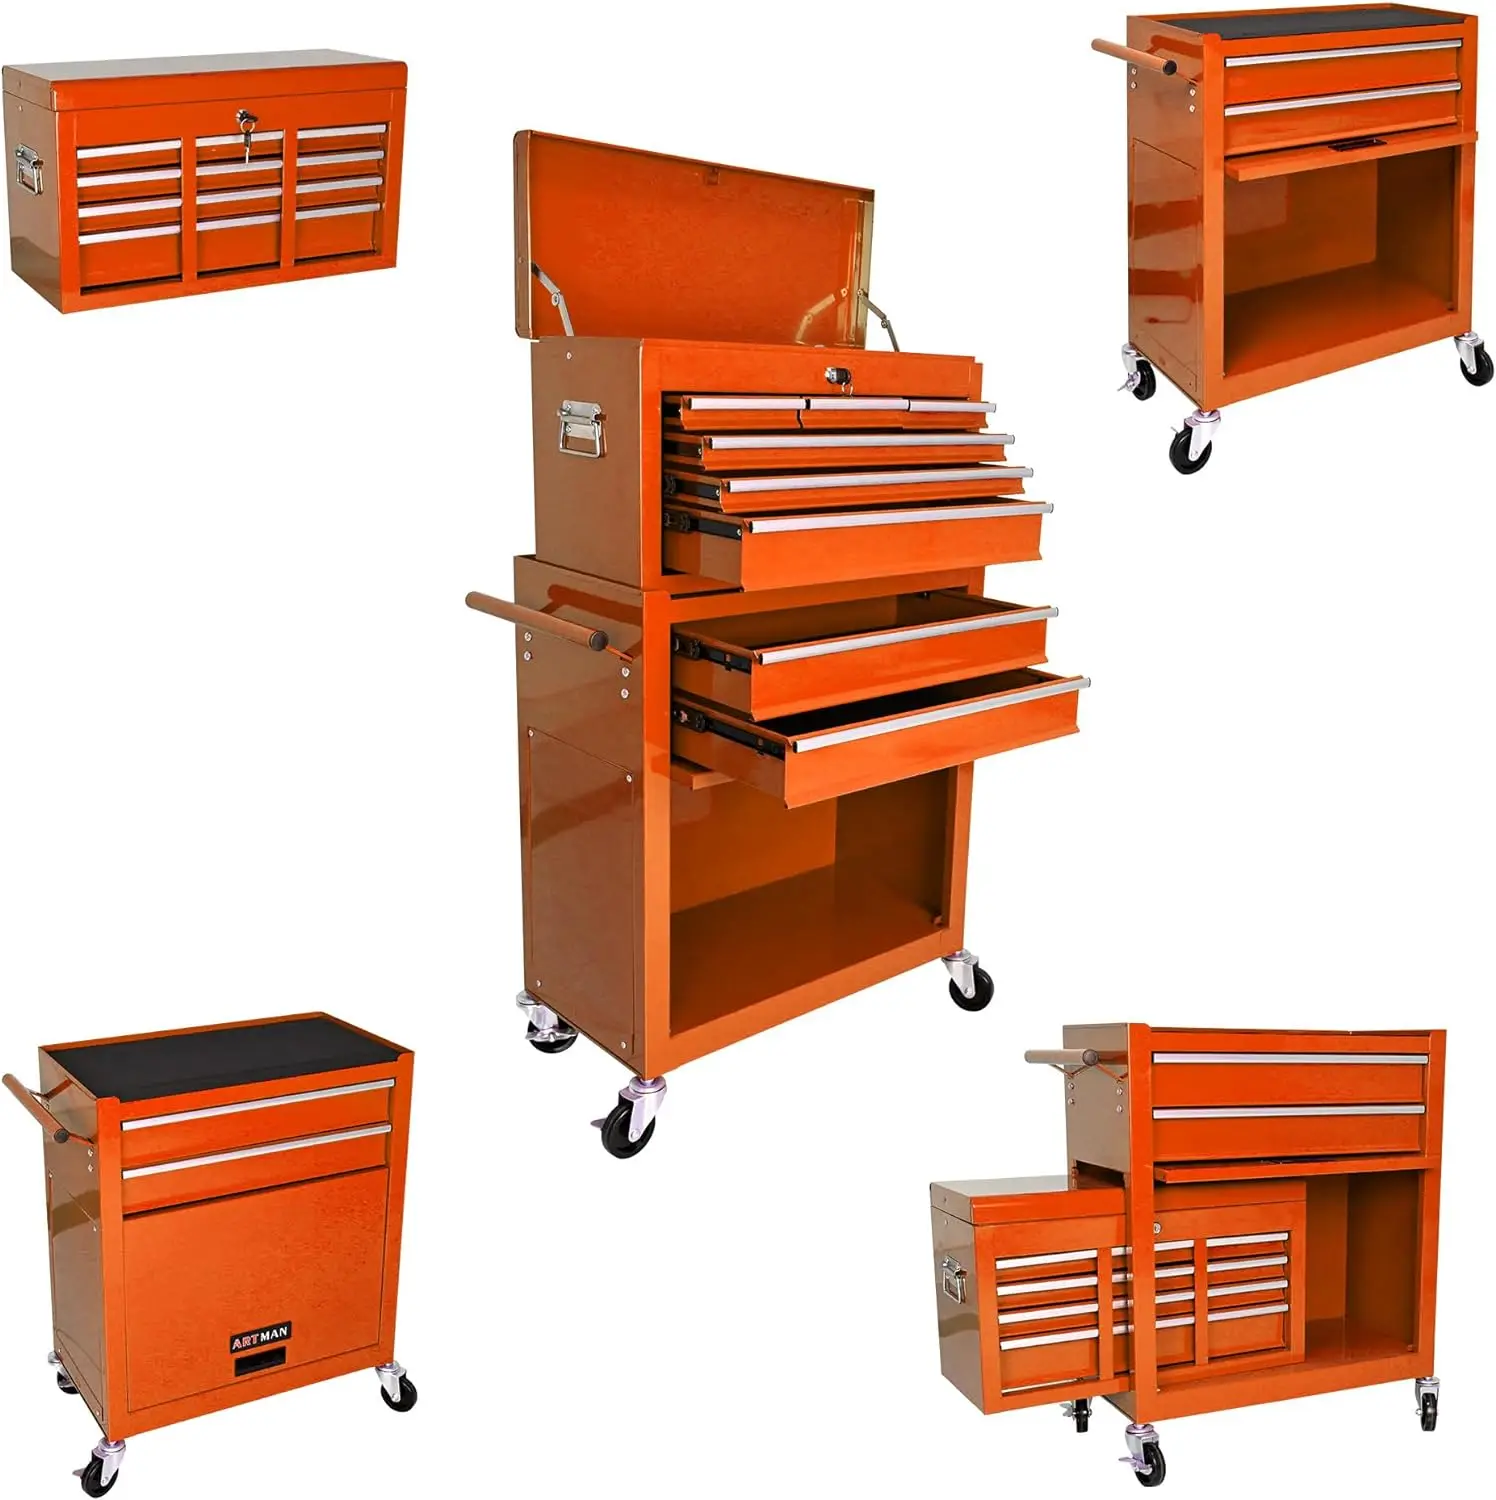 

8 Drawers Rolling Tool Chest with Wheels,High Capacity Tool Chest Organizer for Garage, Workshop use (Orange)